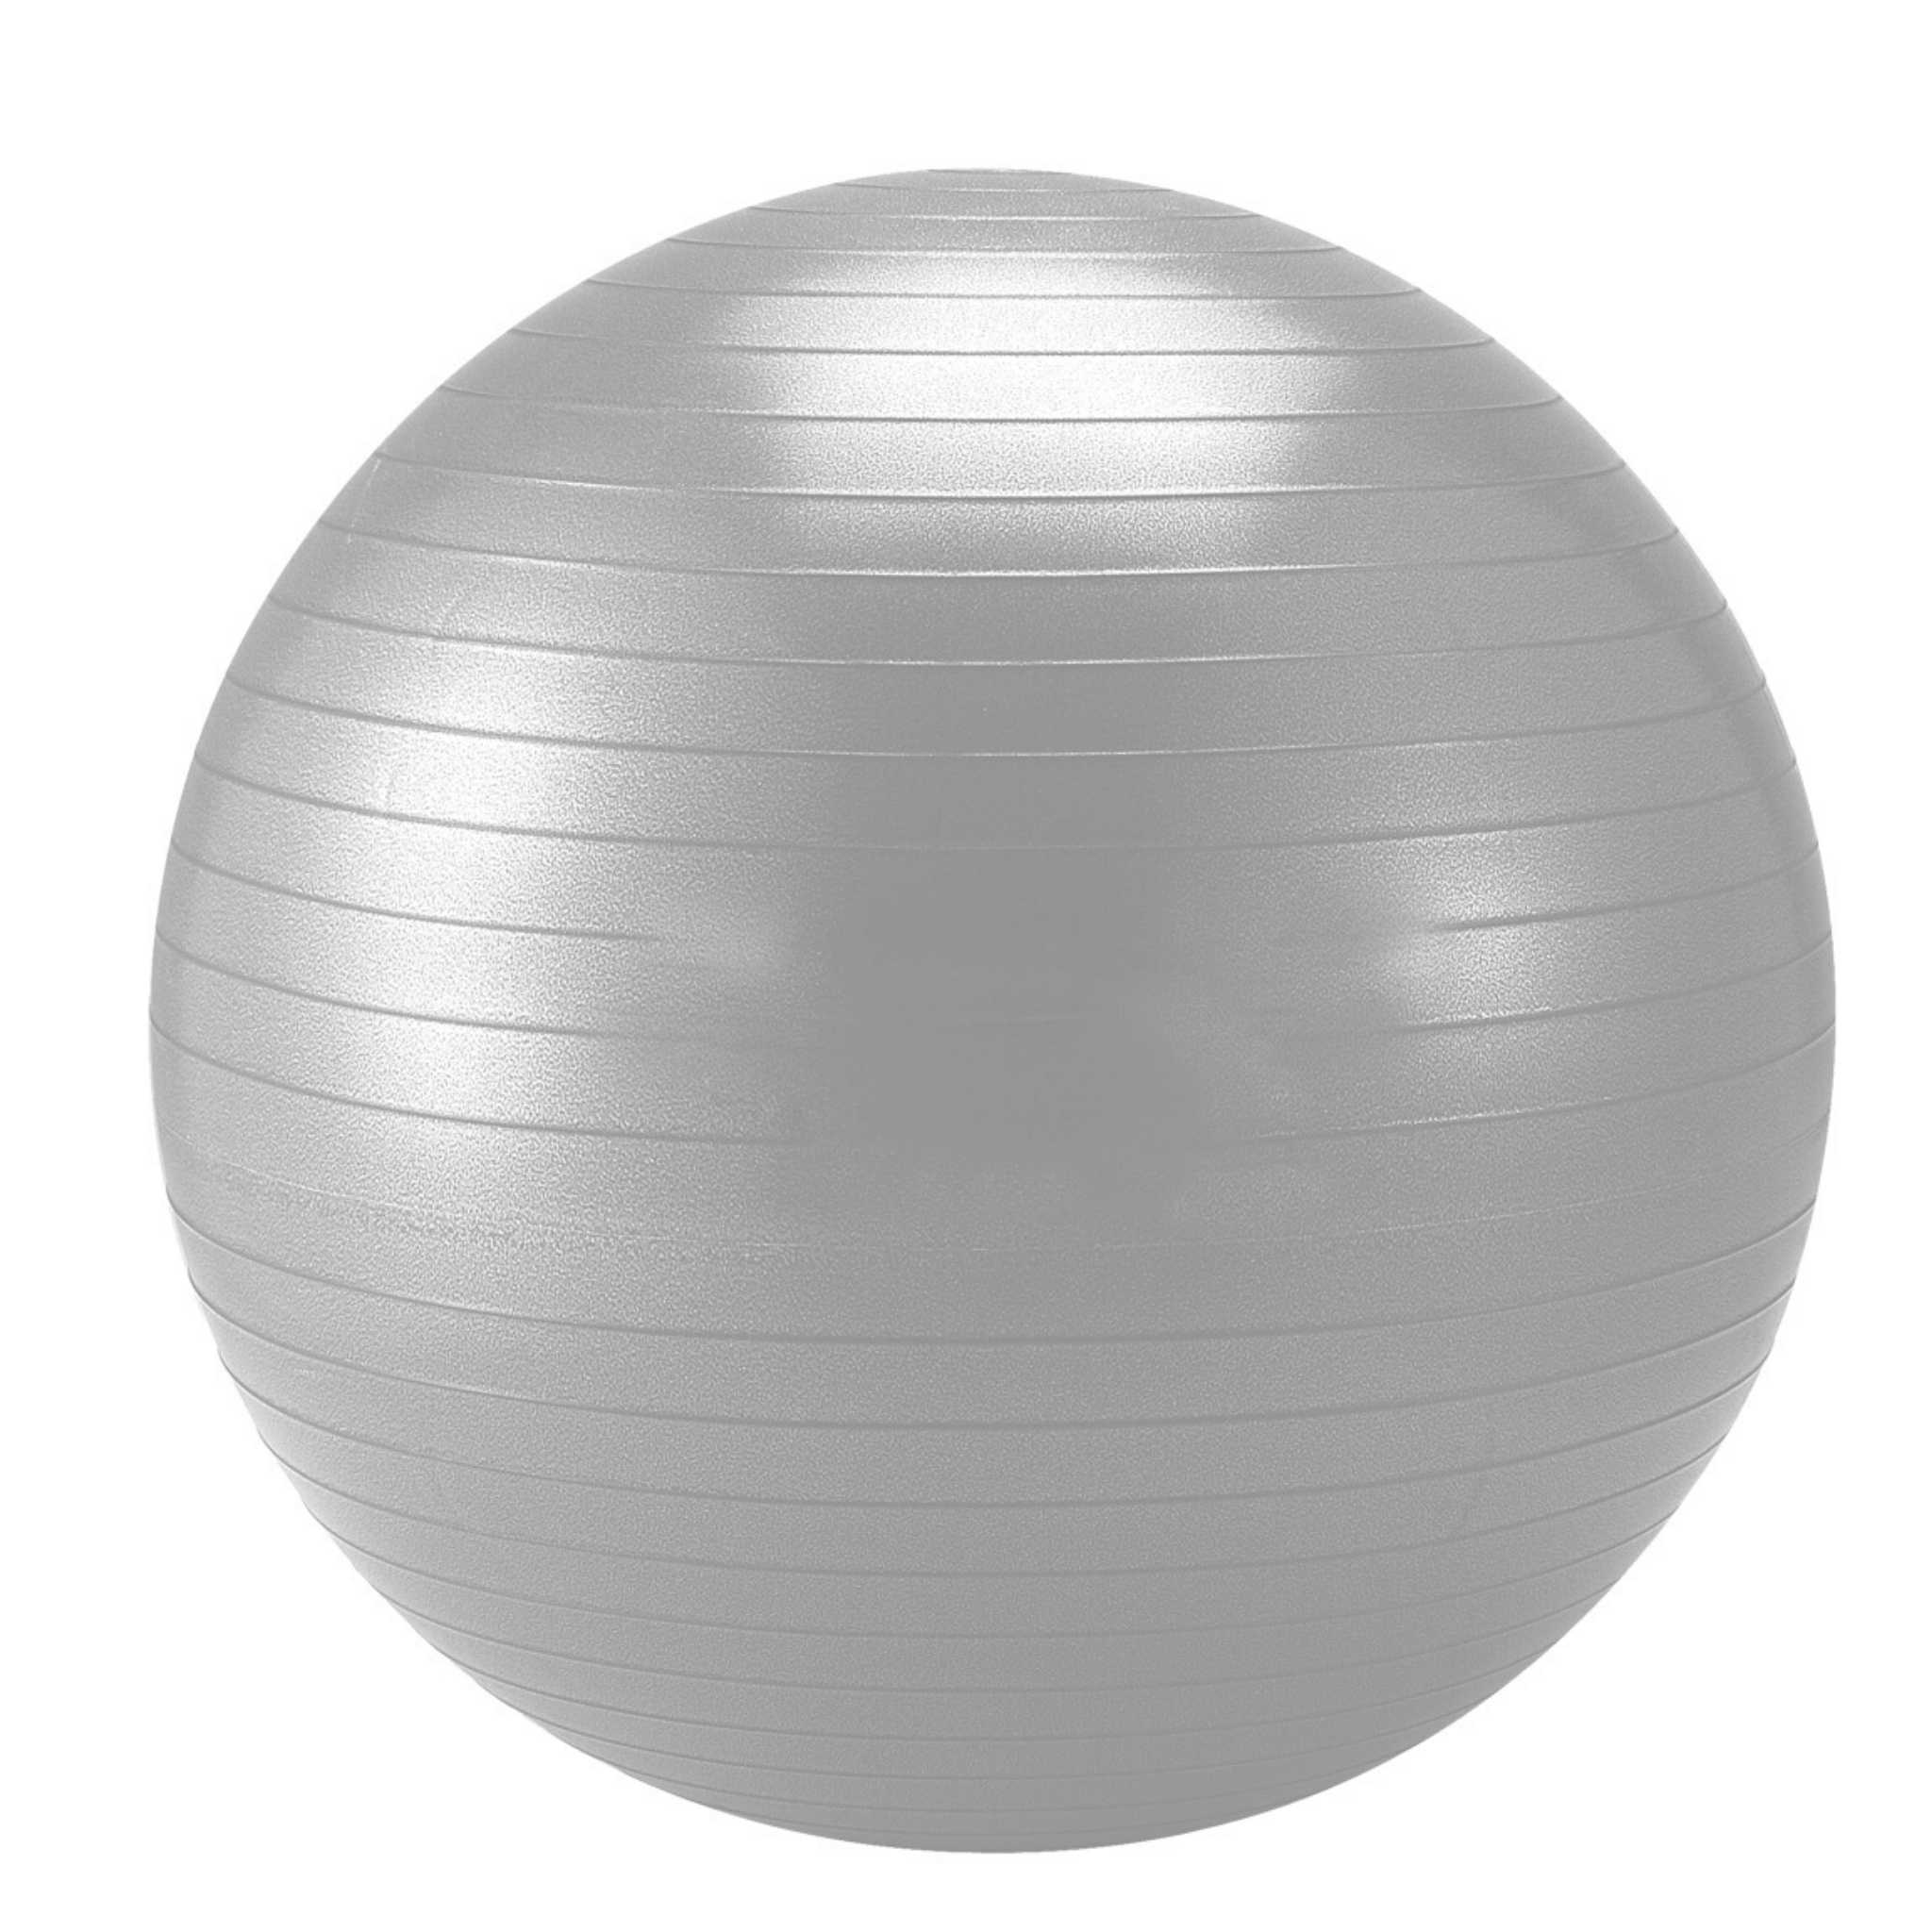 Classic Series Fitness Ball, Anti-Burst, Available in 55, 65 and 75 cm